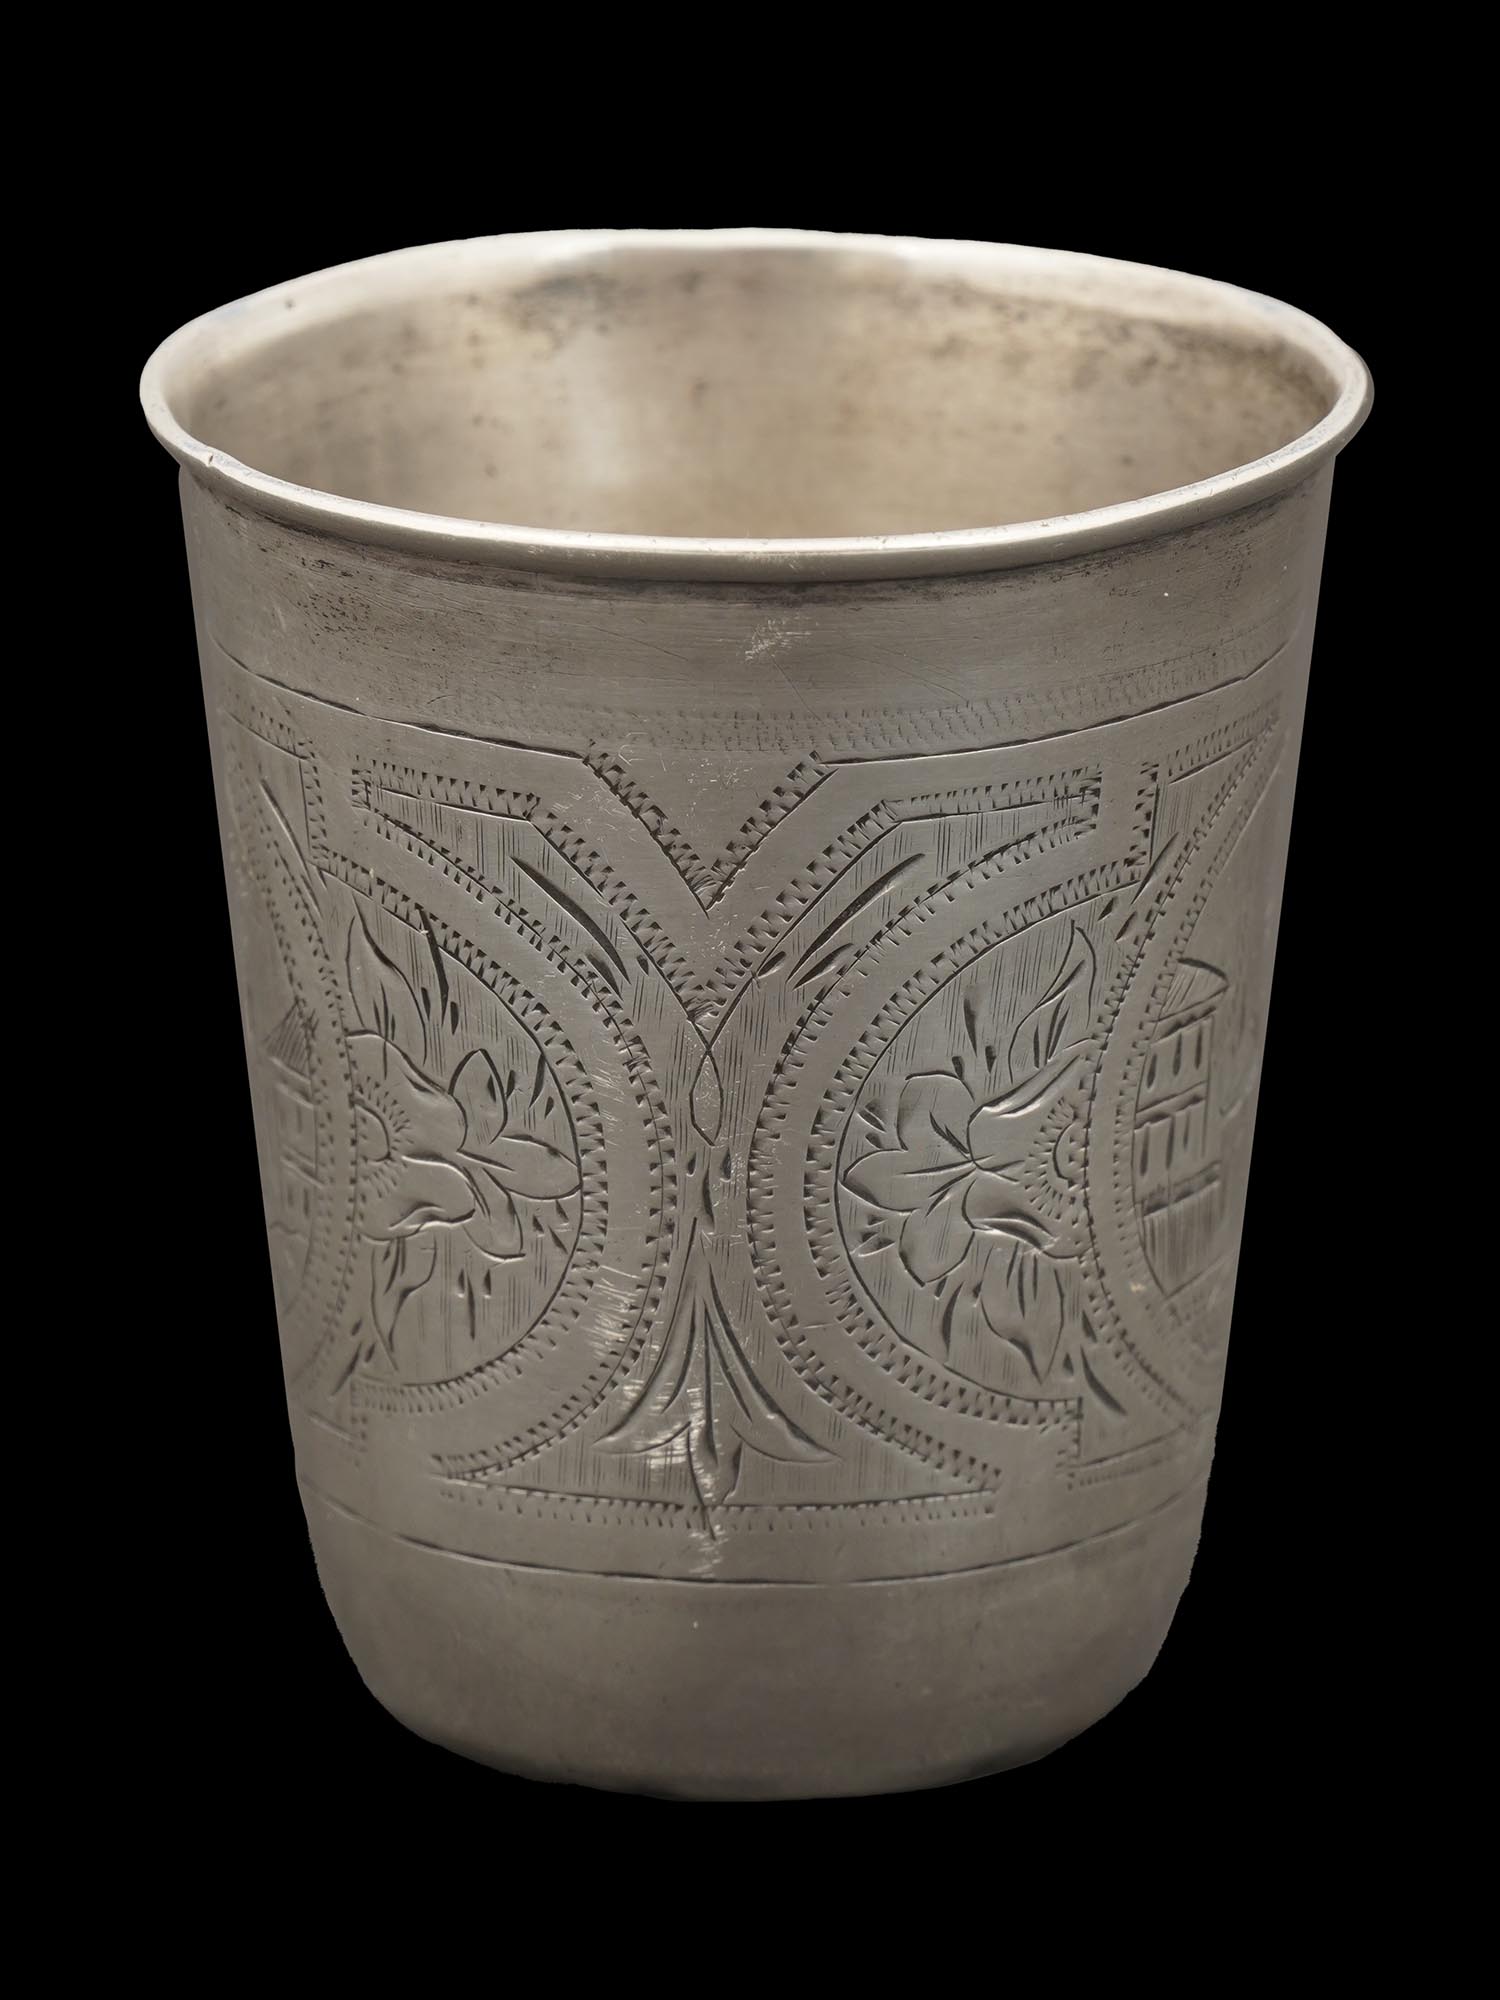 ANTIQUE RUSSIAN SILVER KIDDUSH CUP WITH ENGRAVING PIC-1